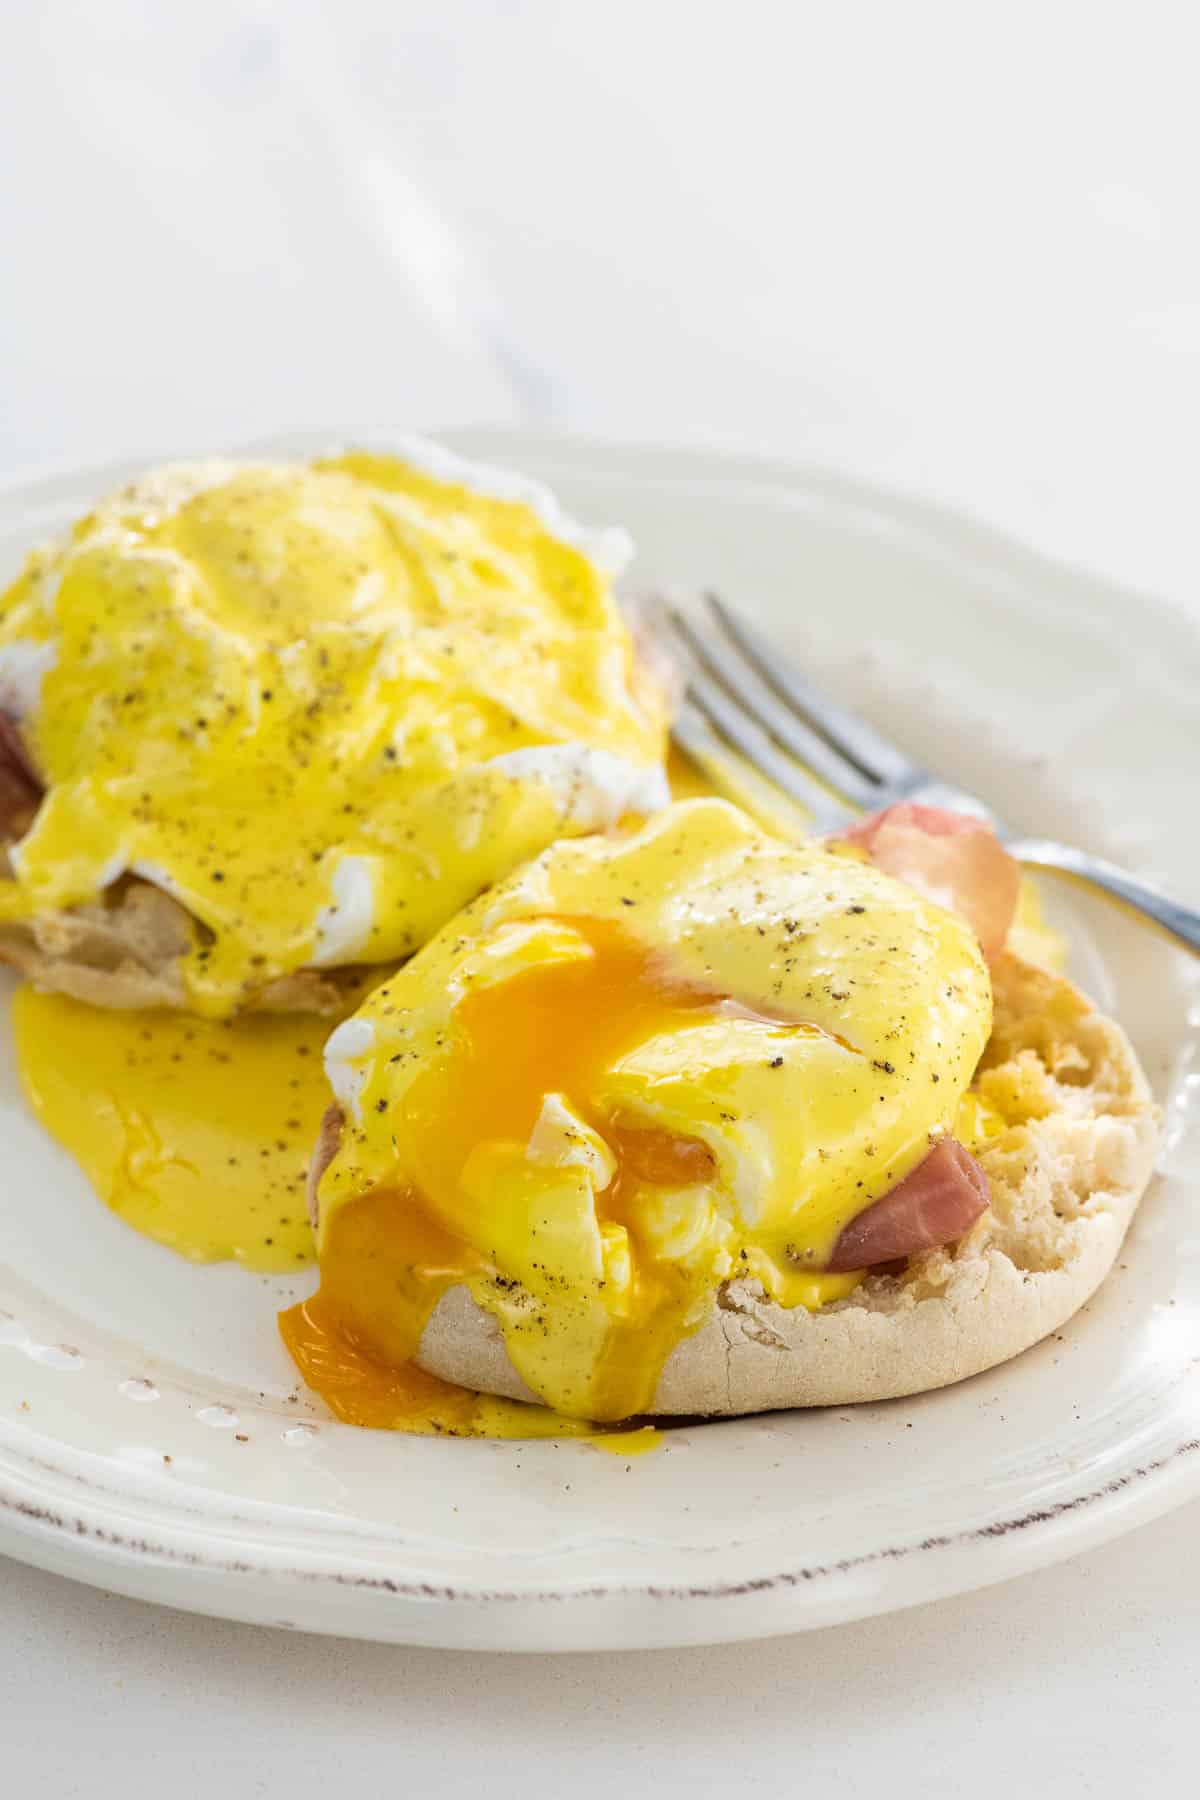 prosciutto eggs benedict with immersion blender hollandaise on a plate with a fork